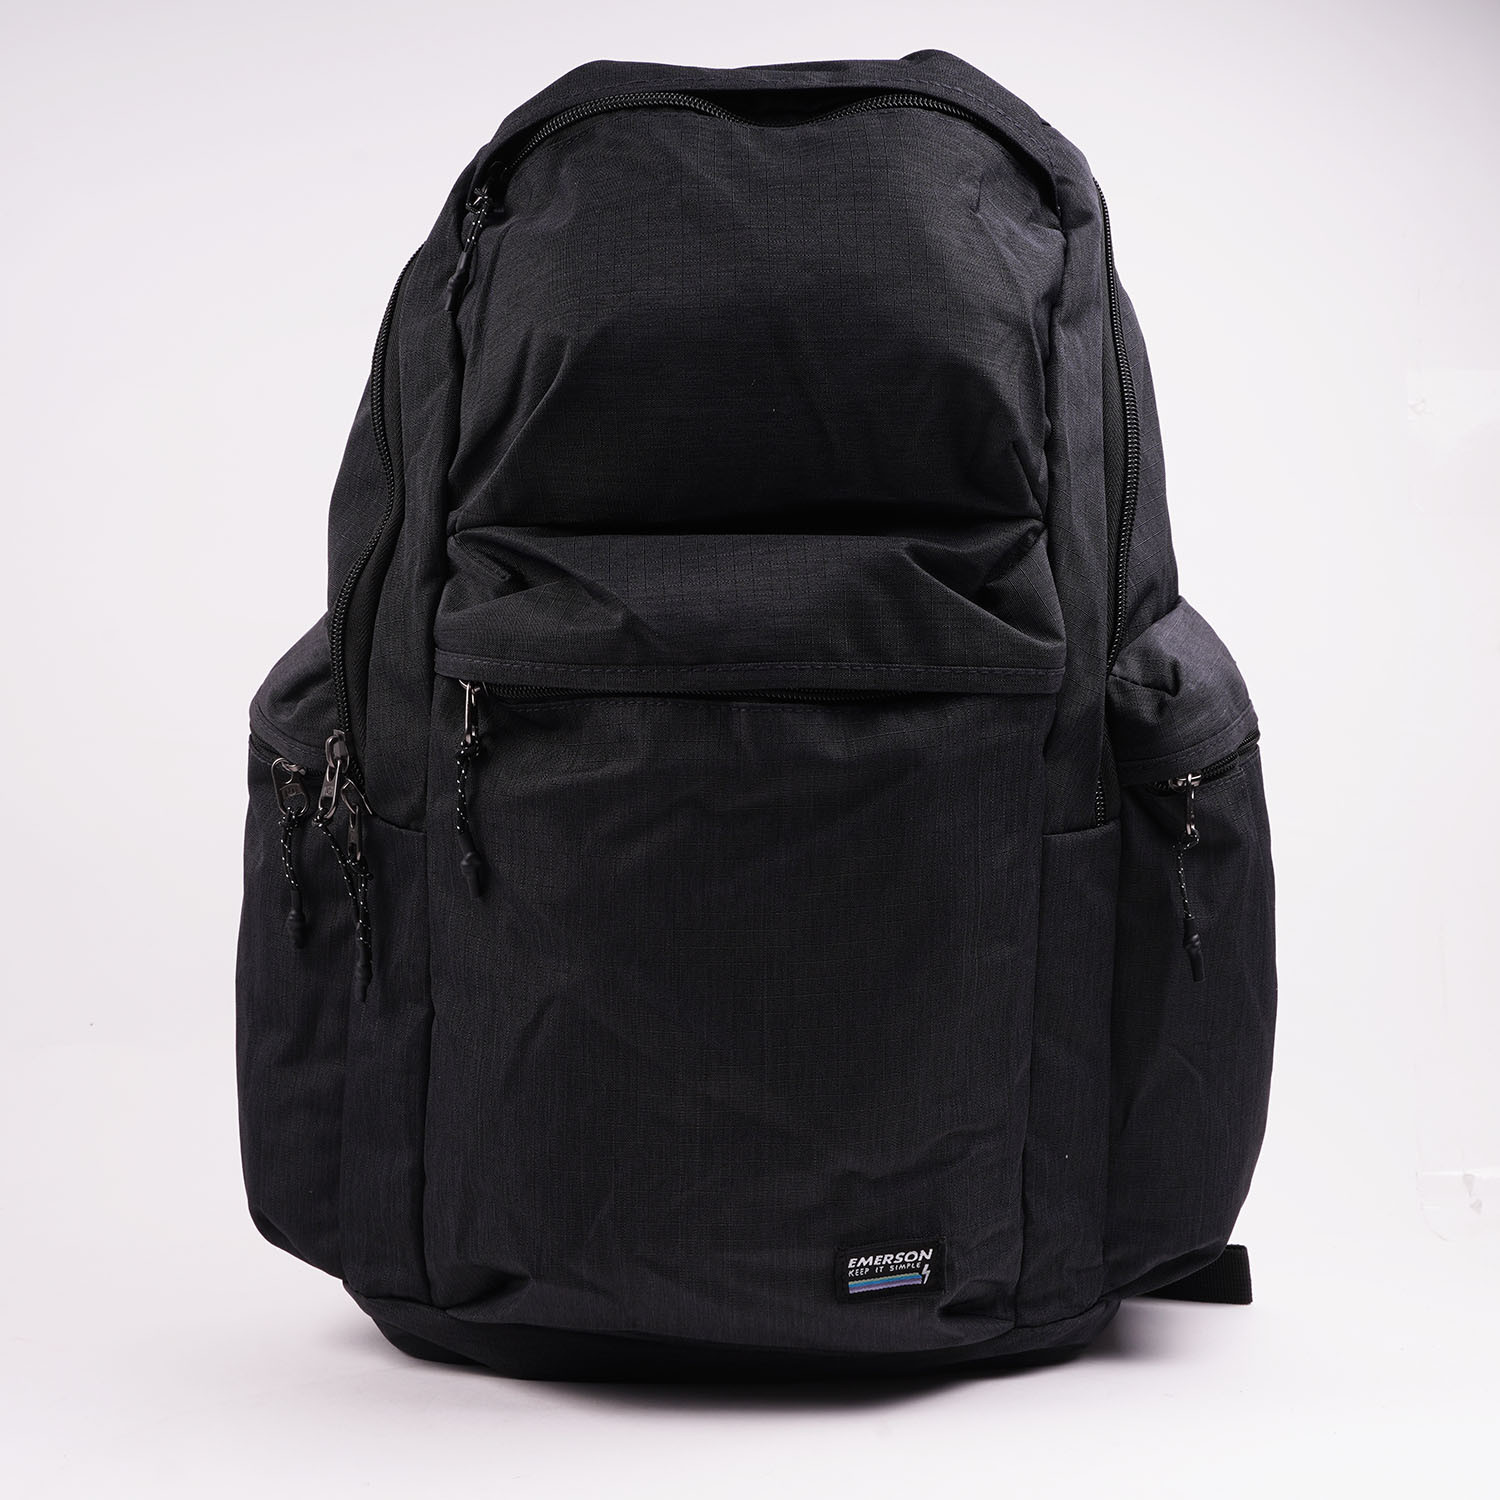 Emerson Unisex Backpack (9000063425_26684)